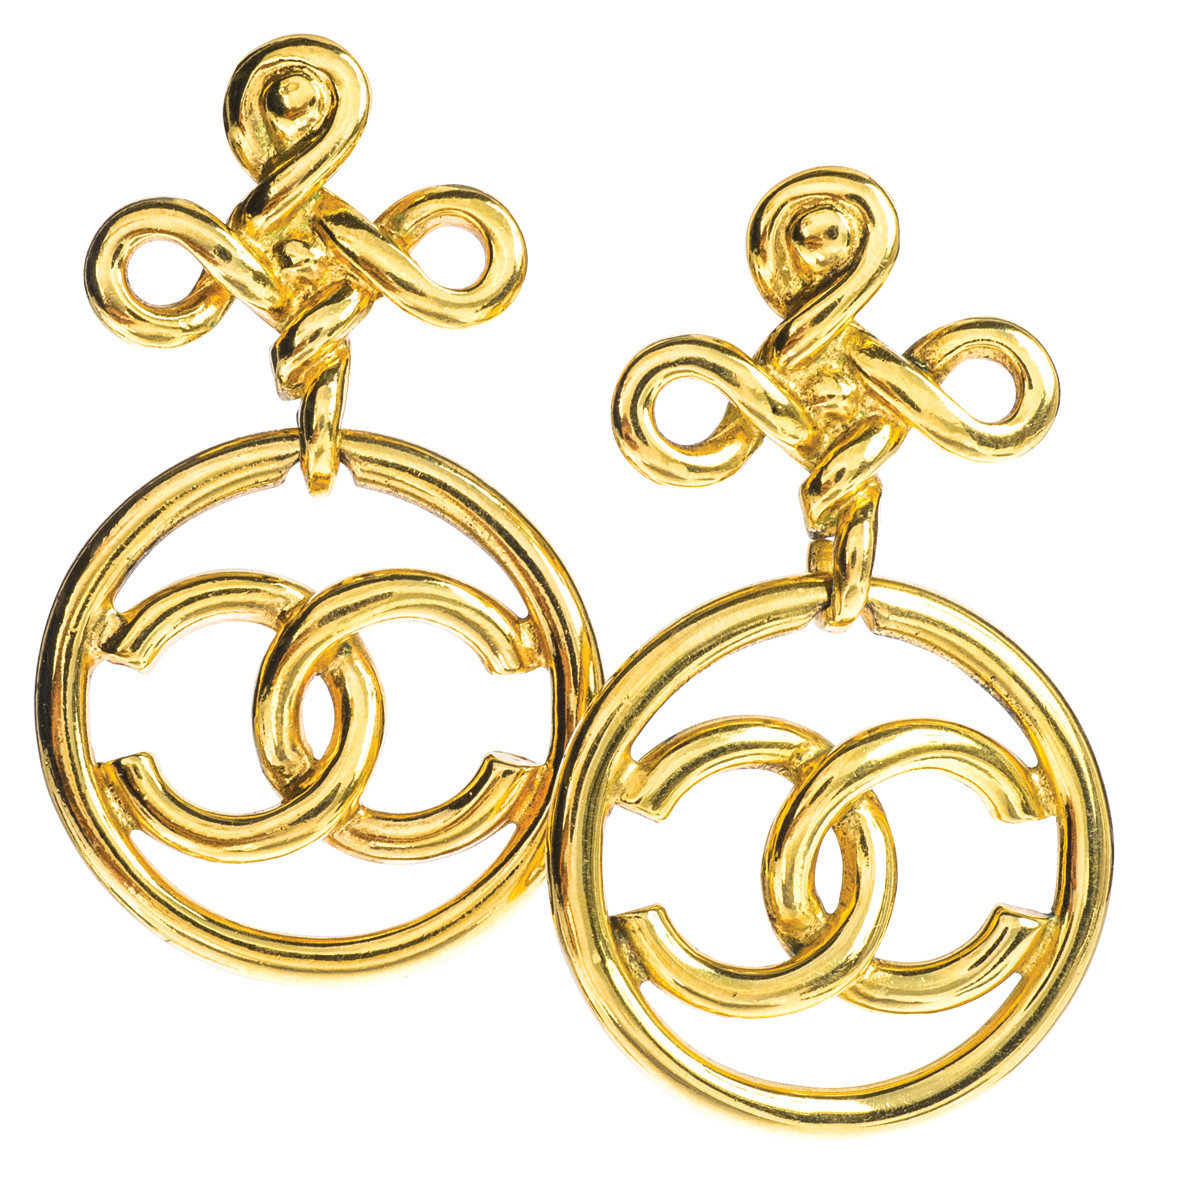 Vintage Chanel Logo Knot Earrings - Shop Jewelry - Shop Jewelry, Watches & Accessories